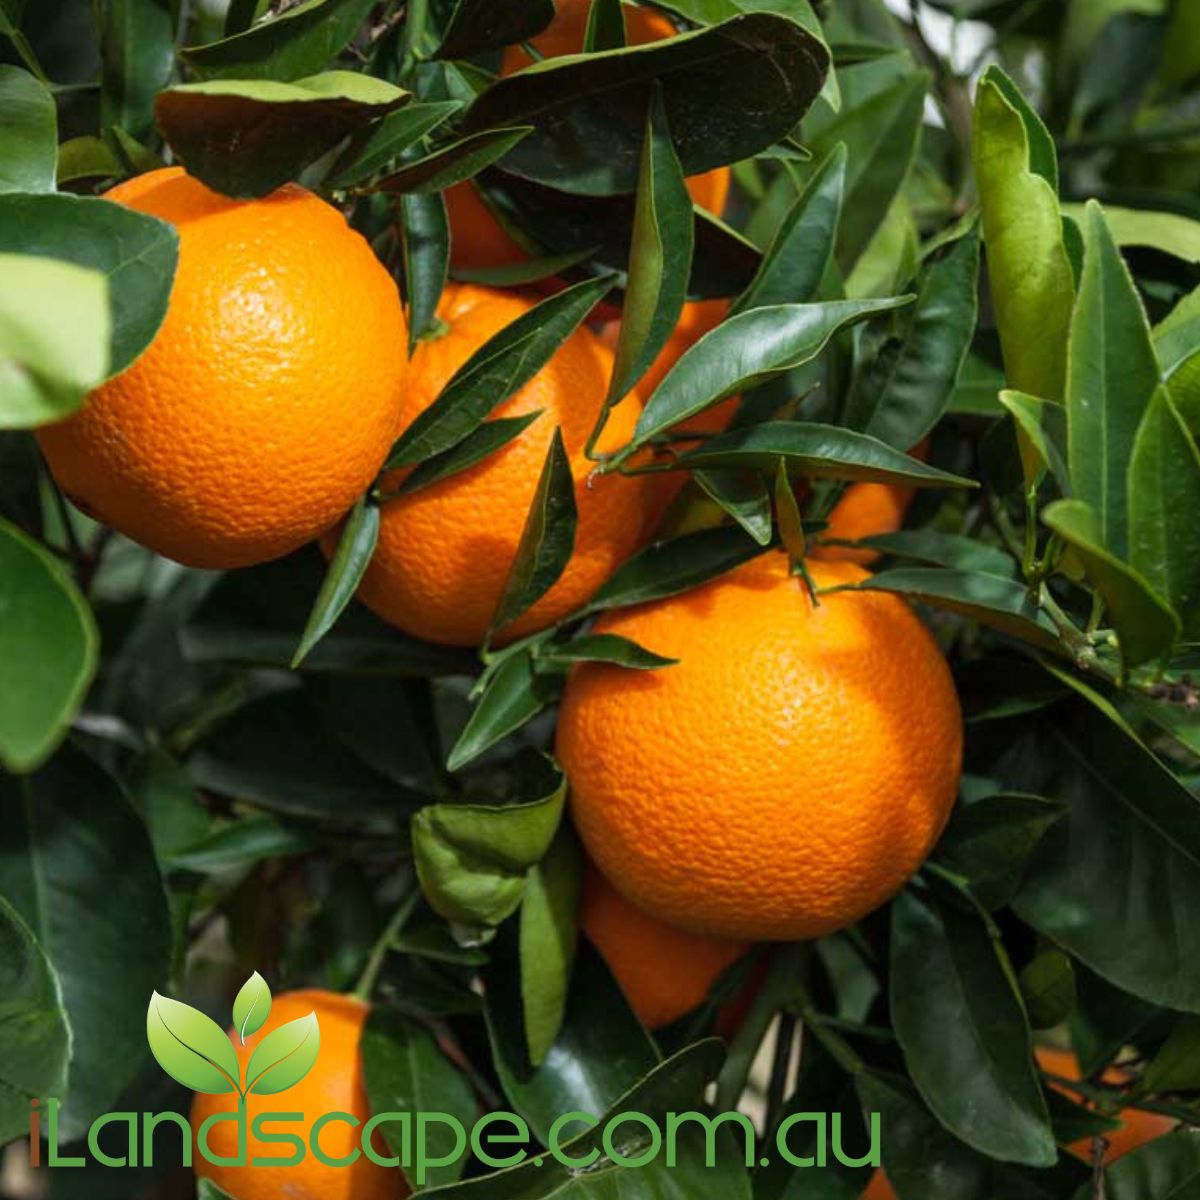 Orange Dwarf 'Washington Navel' is a popular orange that is commonly grown in Australia . Grows to approx. 1-2m in height and fruits between May - August each year  Fertilise seasonally with Fruit & Citrus food and prune regular to keep shape and promote more fruit development 